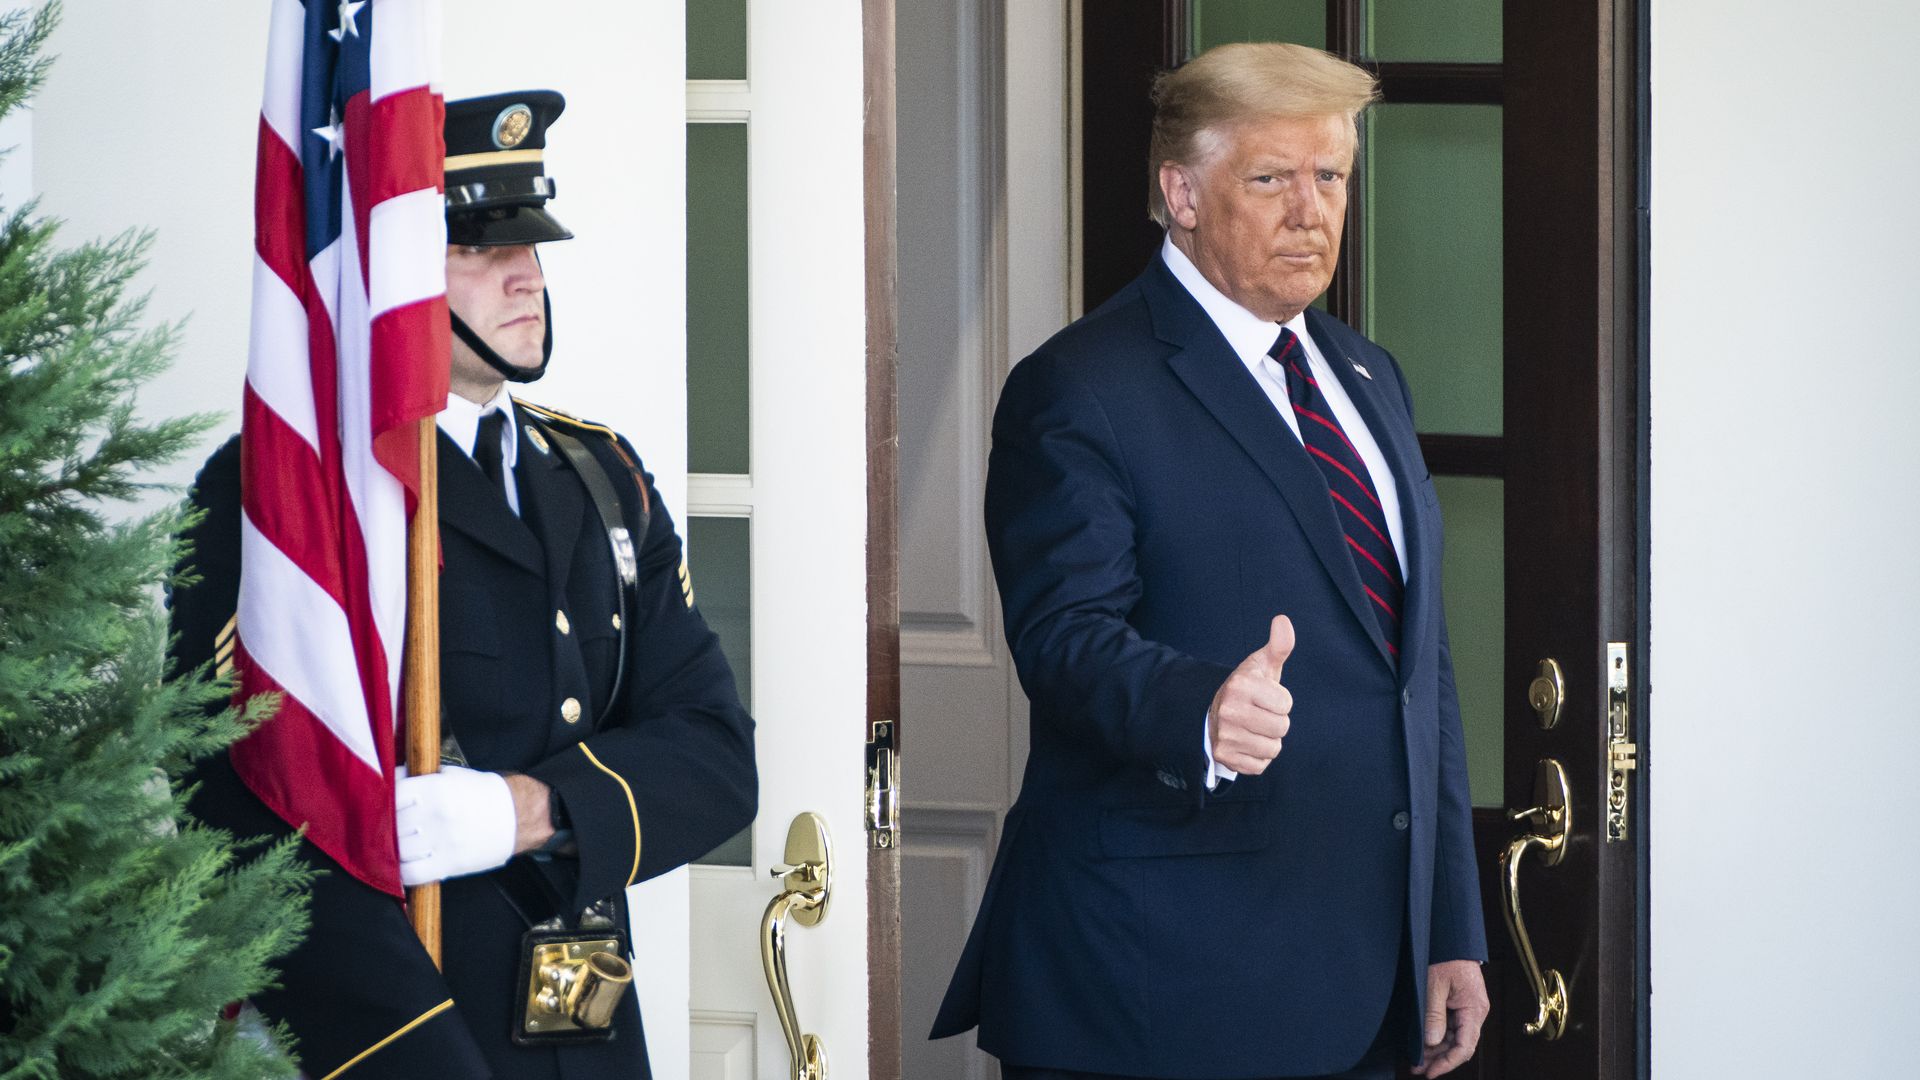 Trump wearing a suit steps out of a doorway 